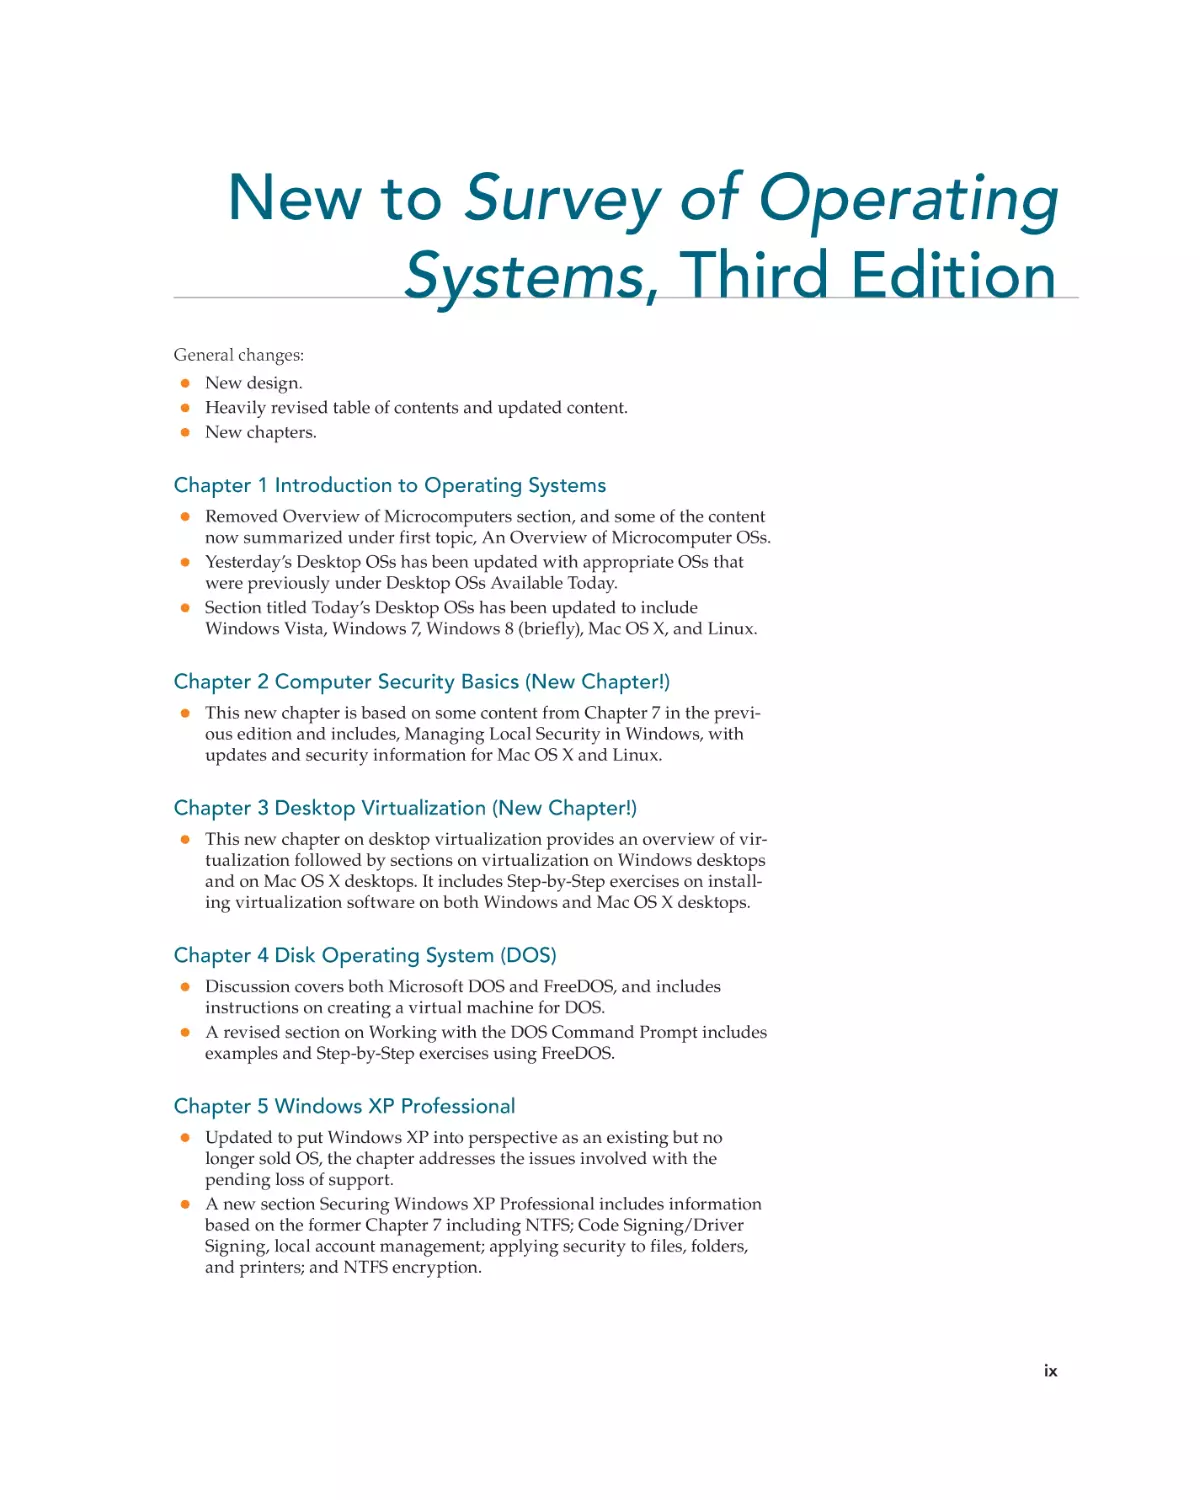 New to Survey of Operating Systems, Third Edition